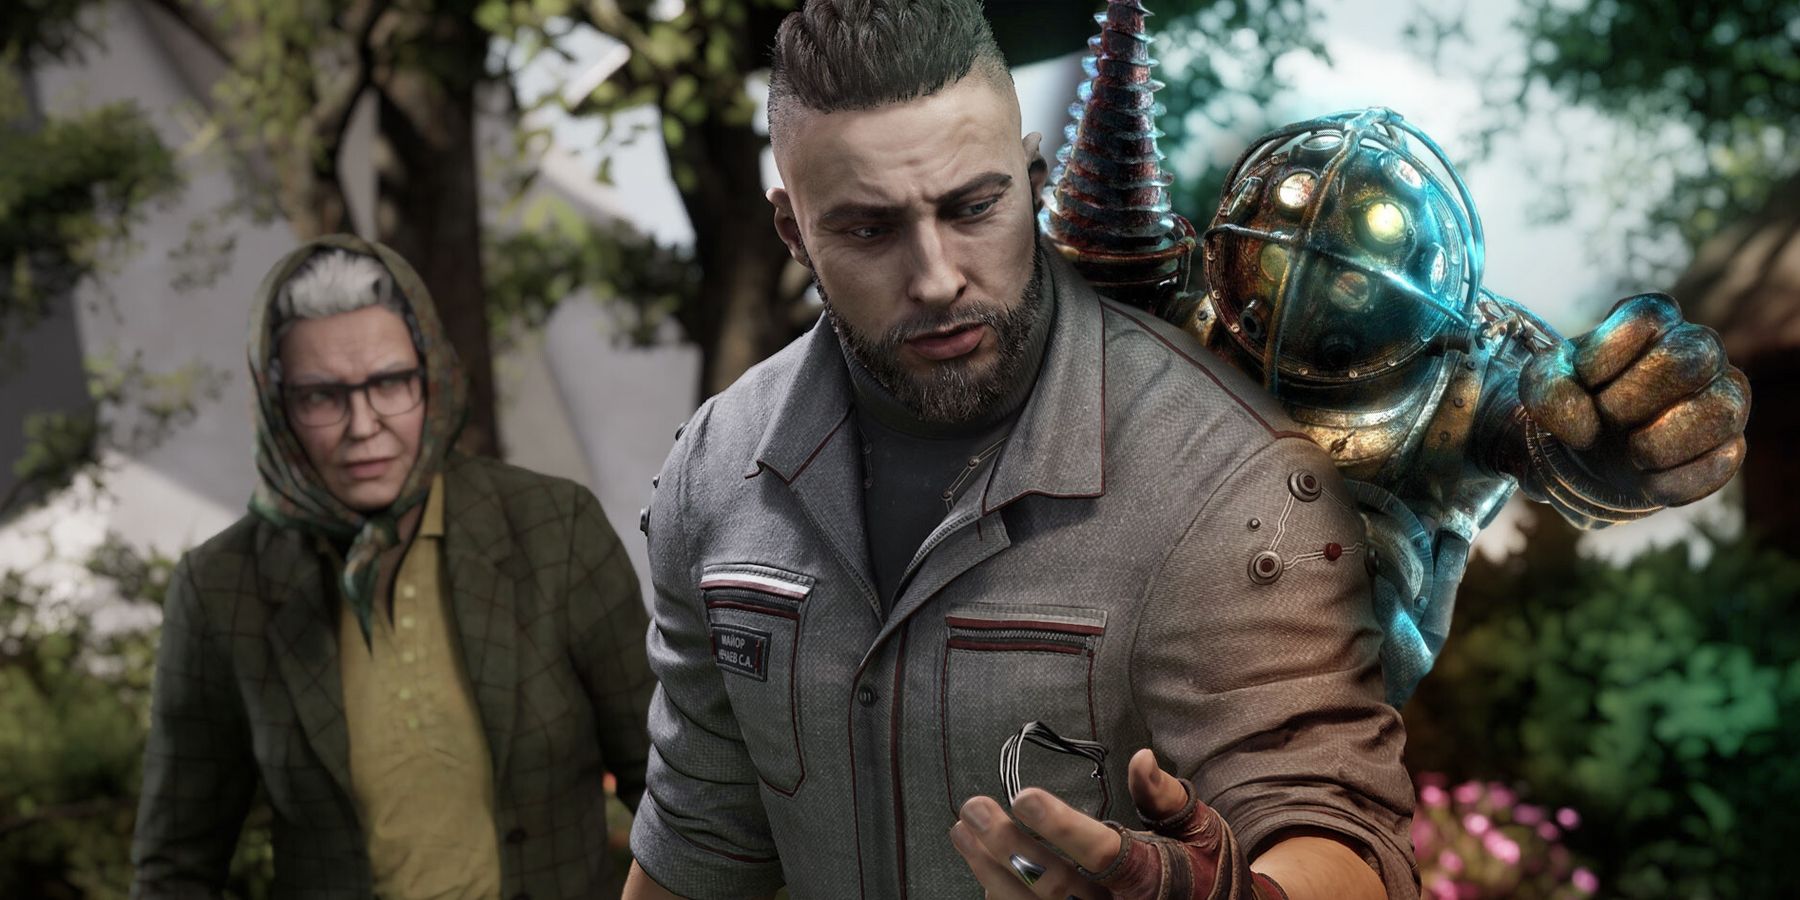 Comparing Atomic Heart to the Bioshock franchise.